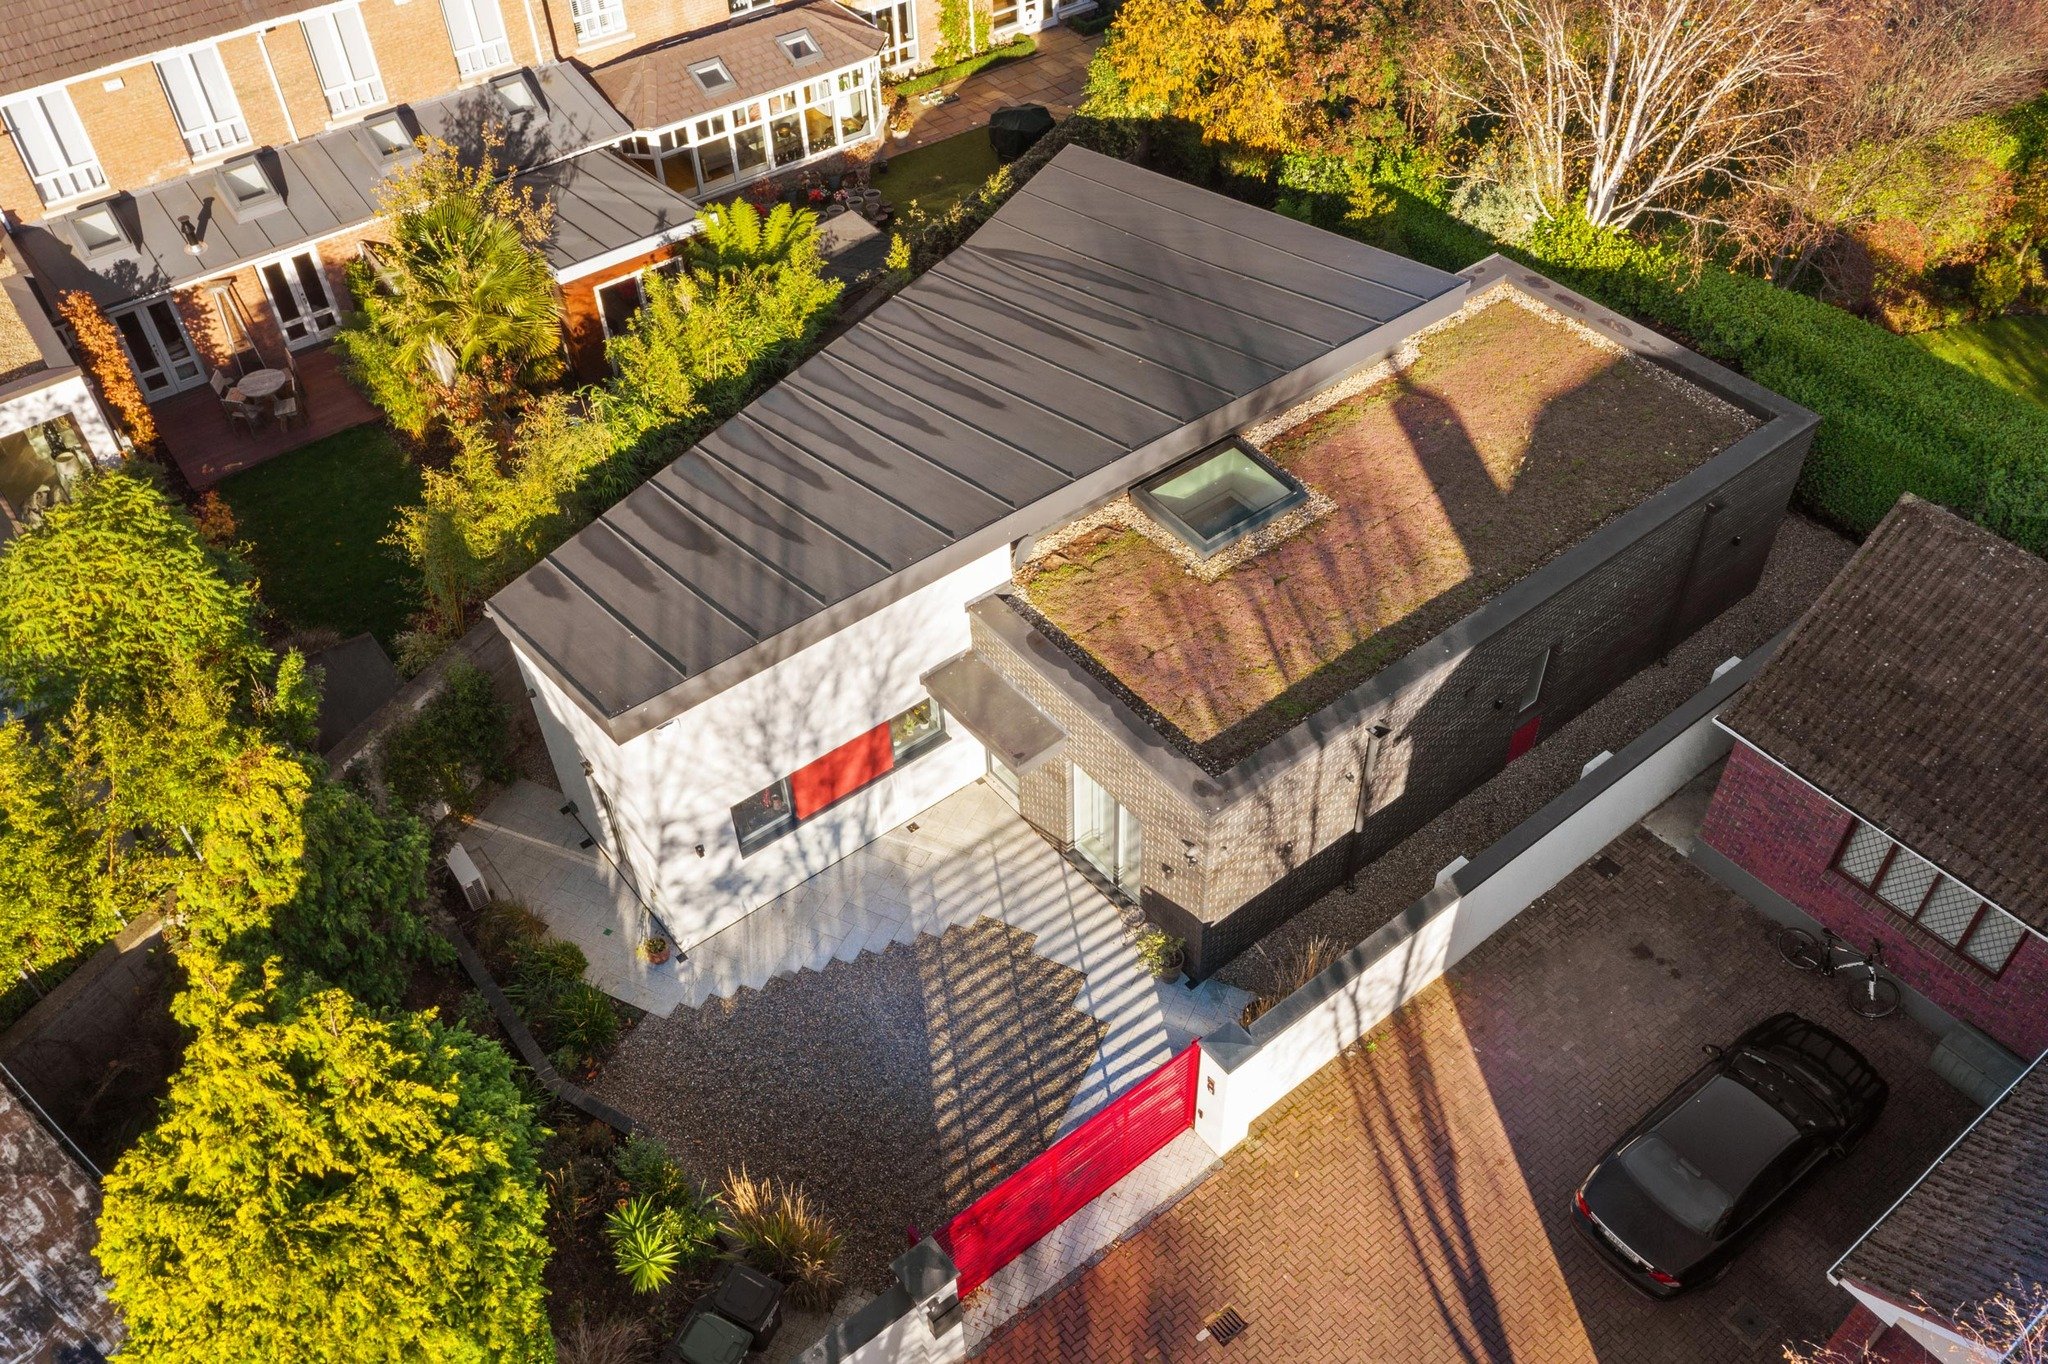 Even though it might not seem like it, we've managed to make the most of the outdoor space in this Dublin home. 🏡 

By getting creative with the roof overhang, we've crafted a hidden gem of an outdoor space, giving the client that much-needed space 